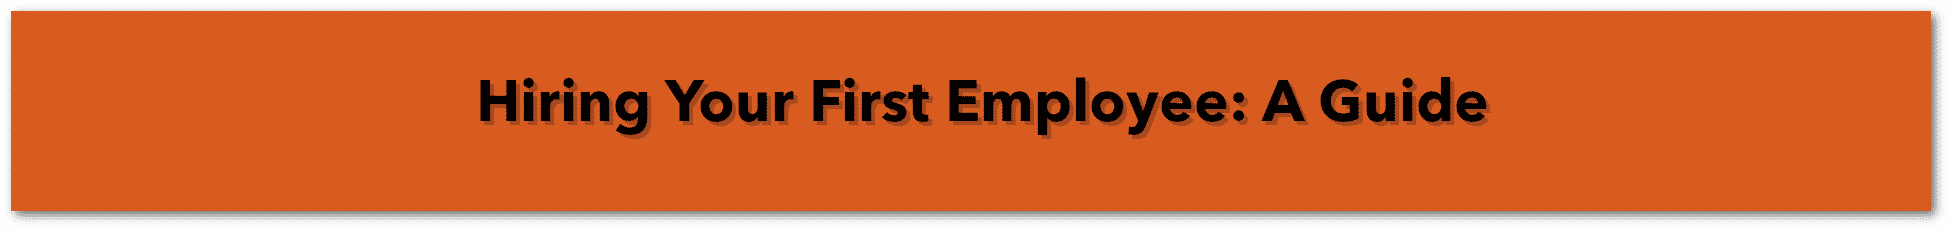 Hiring Your First Employee: A Guide